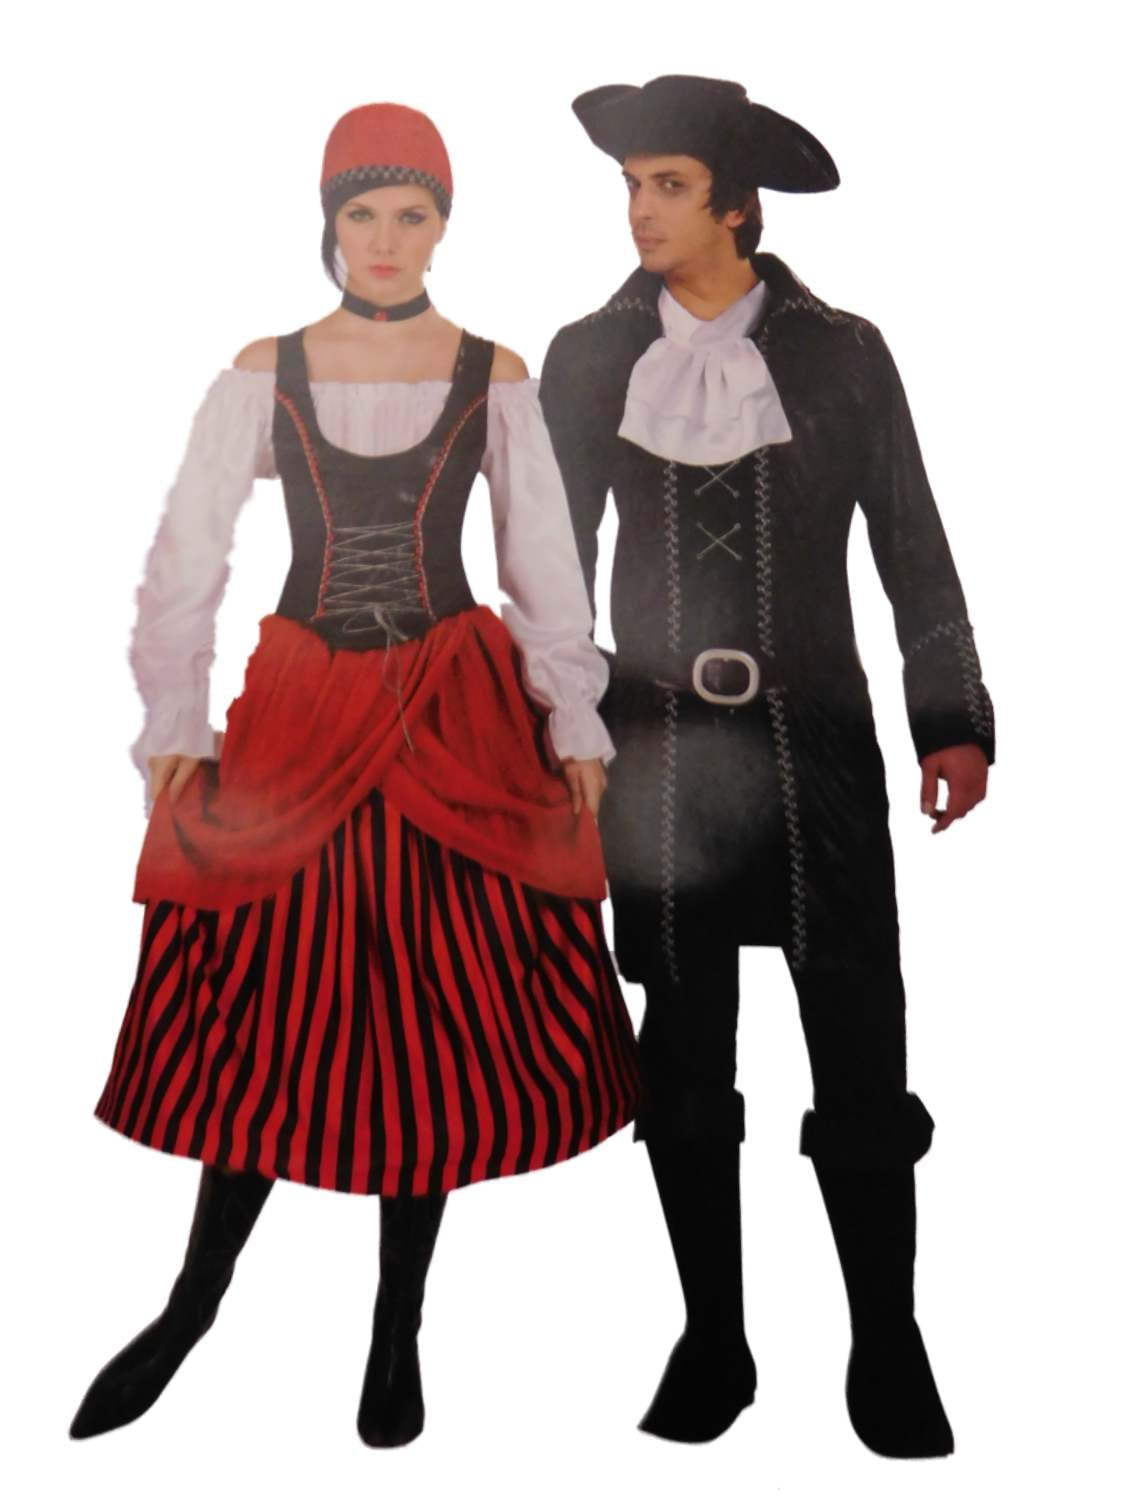 Details about   Halloween Costume Totally Ghoul Womens Pretty Pirate One Size Dress and Bandana 